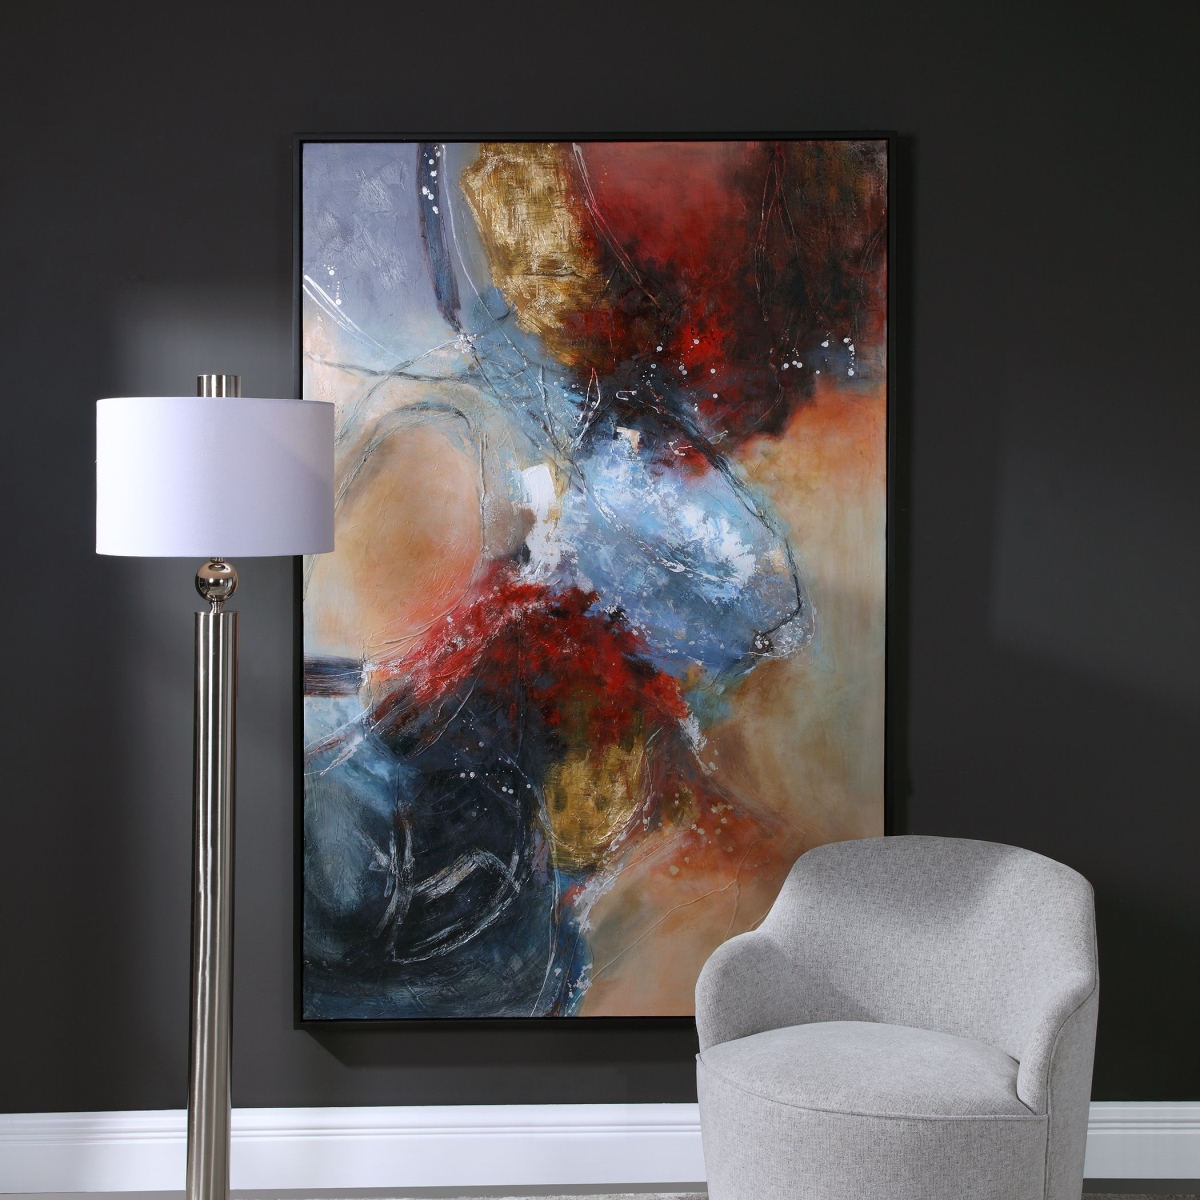 Picture of 212 Main 51306 57.09 x 81.10 x 3.94 in. Summer Sunset Abstract Art